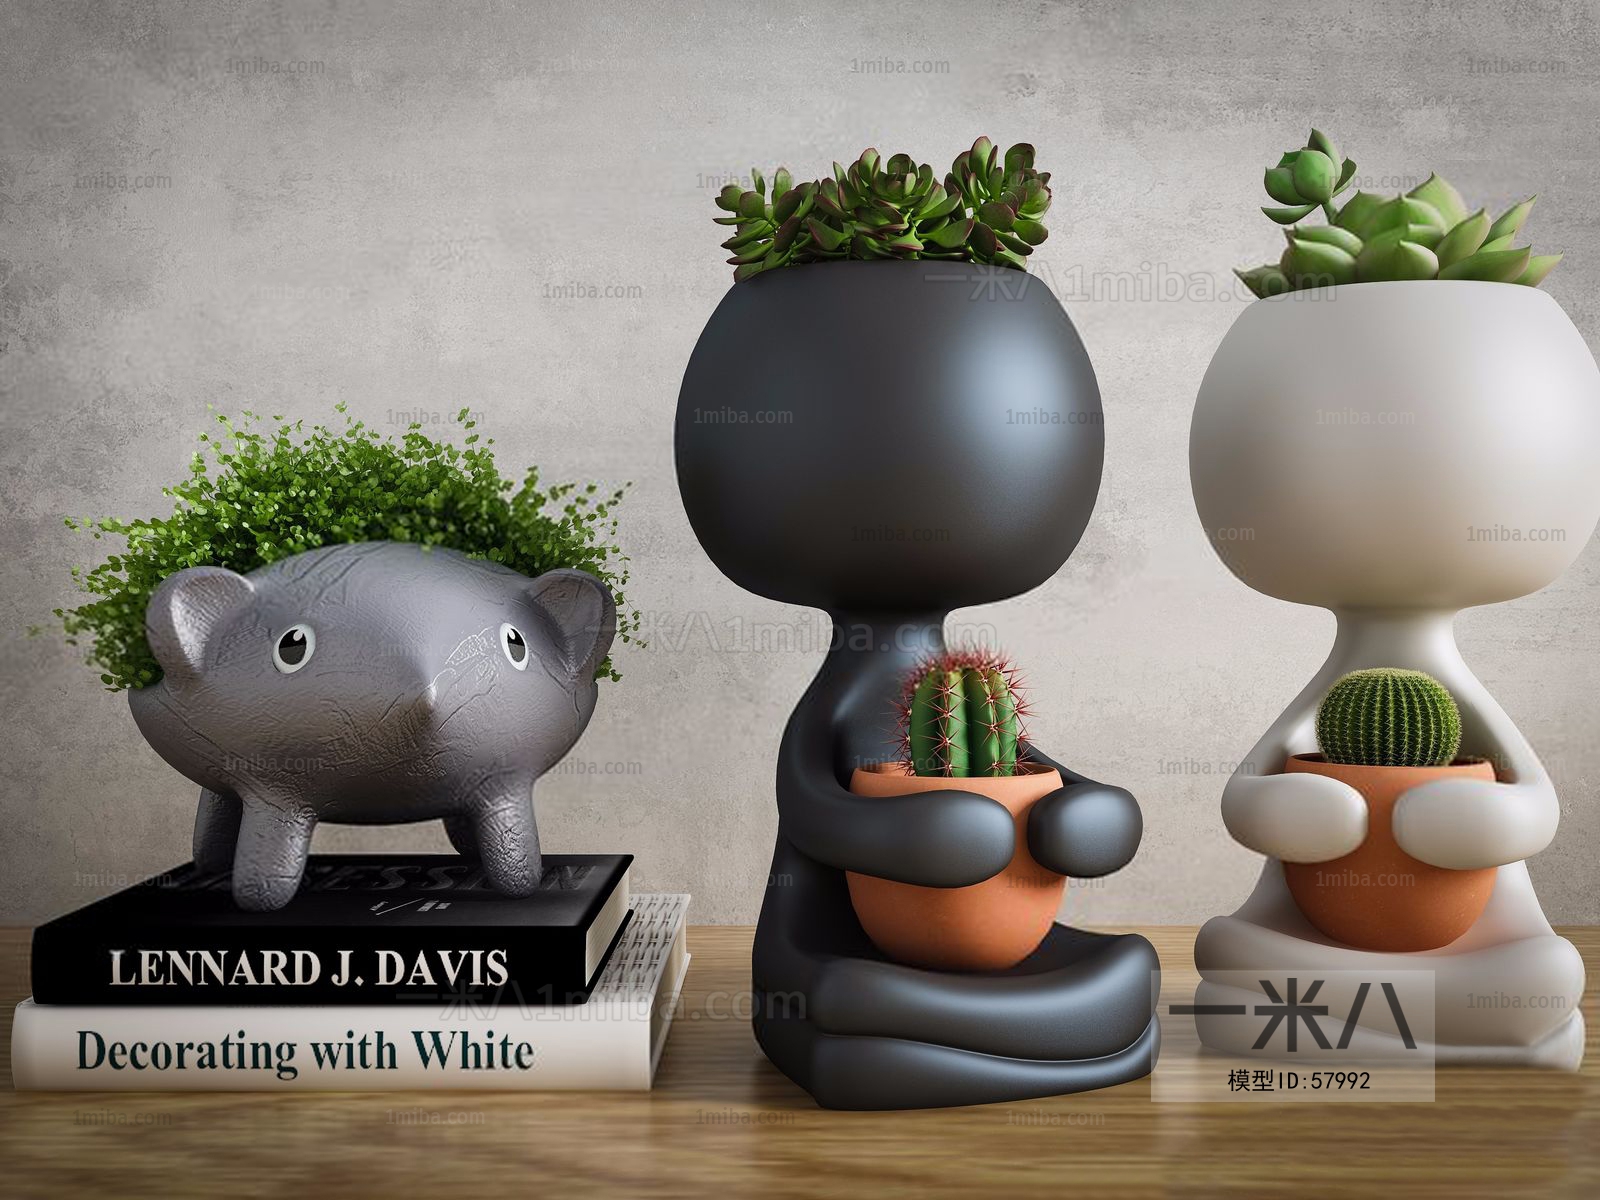 Modern Nordic Style Potted Green Plant